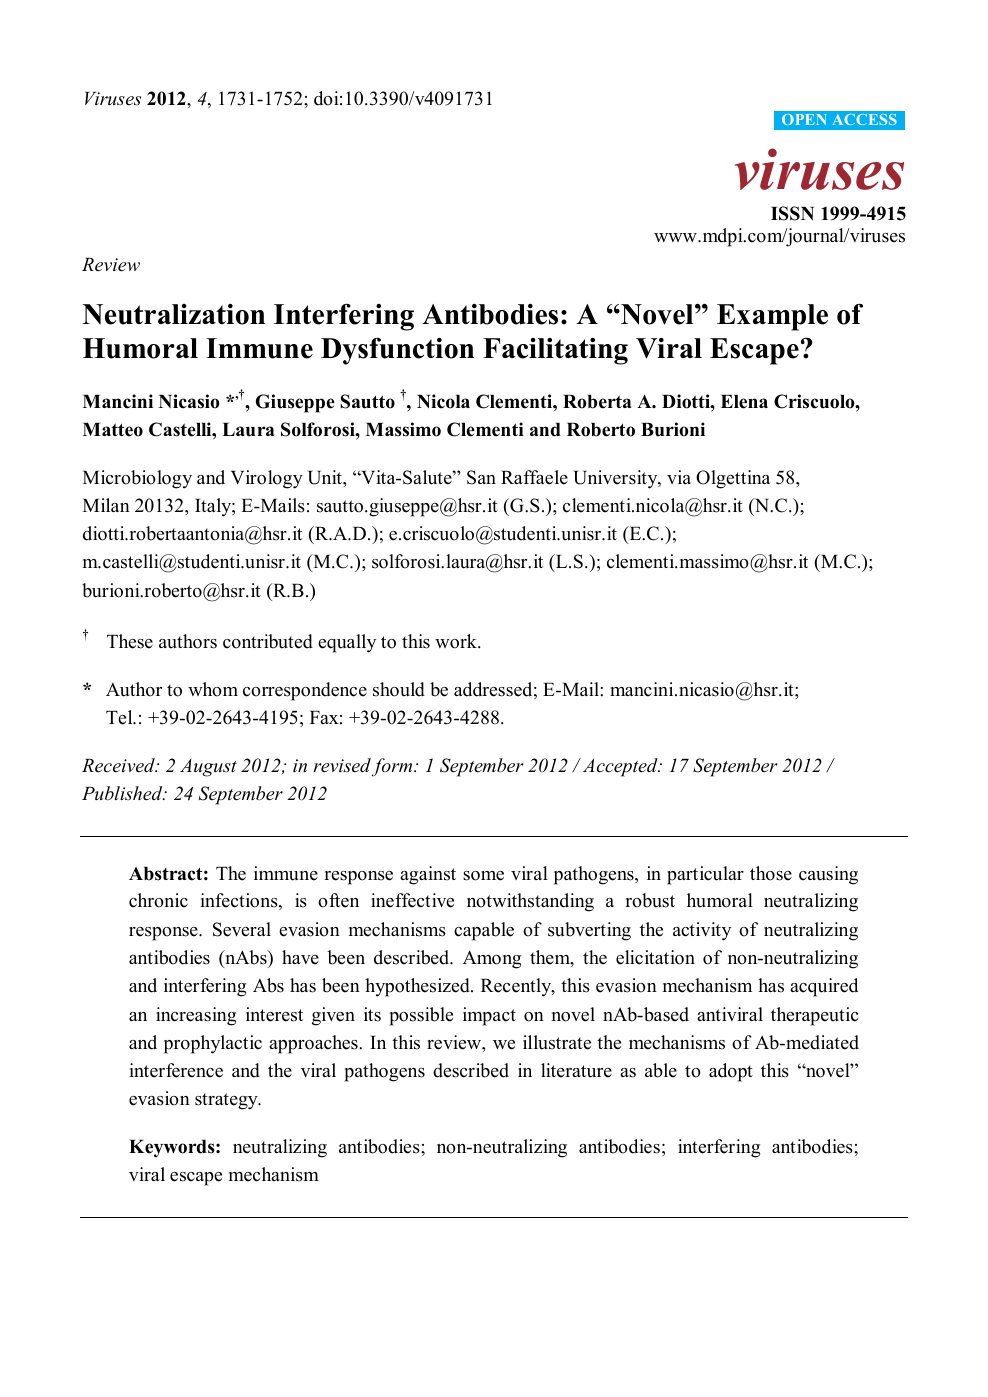 Neutralization Interfering Antibodies A Novel Example Of Humoral Immune Dysfunction Facilitating Viral Escape Topic Of Research Paper In Biological Sciences Download Scholarly Article Pdf And Read For Free On Cyberleninka Open